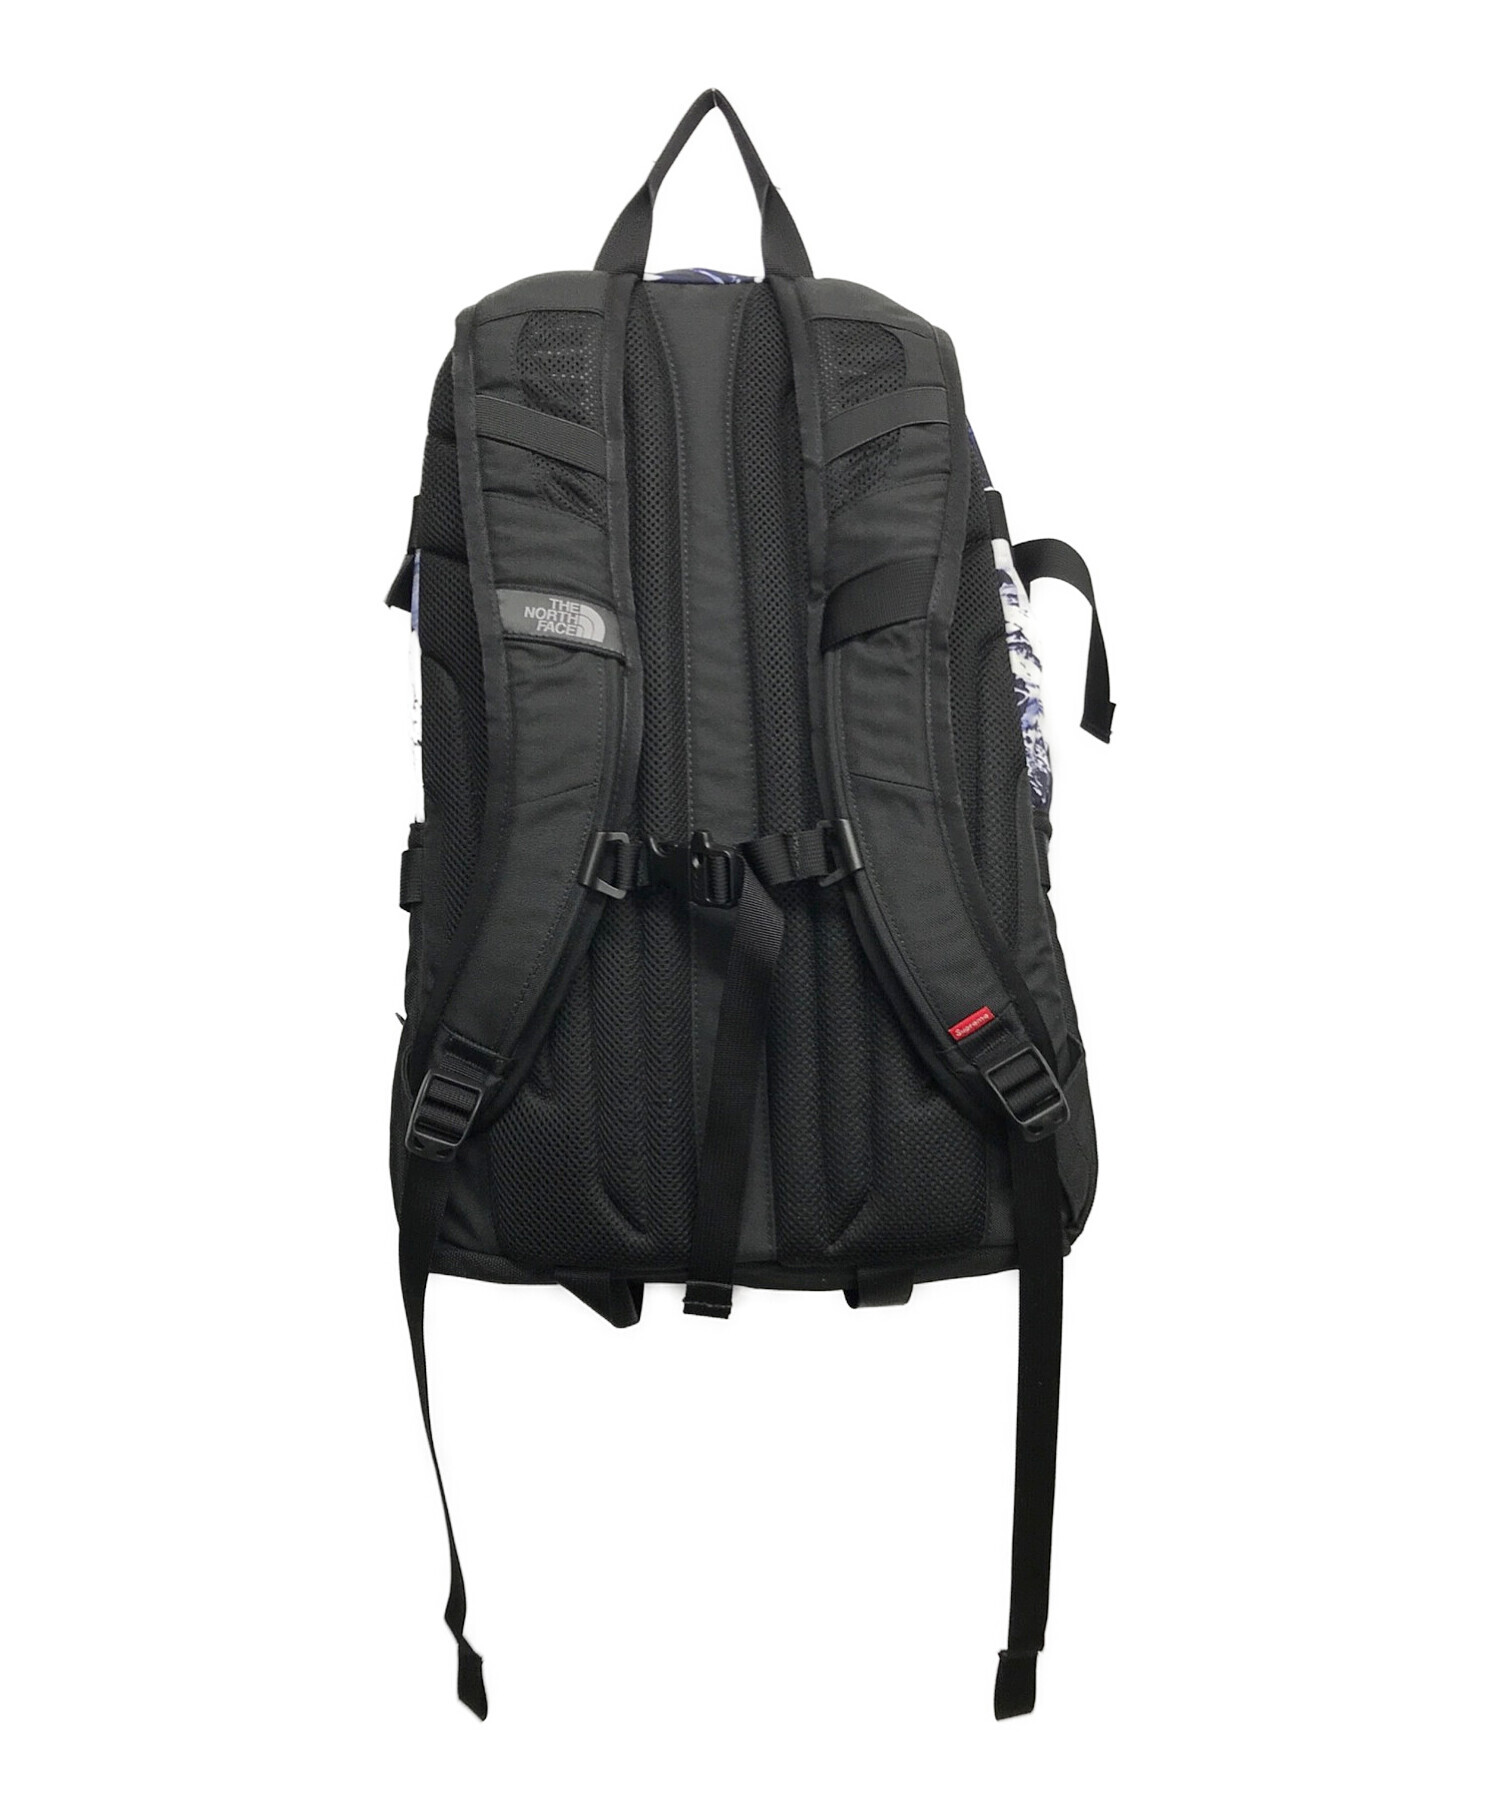 supreme The North Face 17  Backpack 雪山